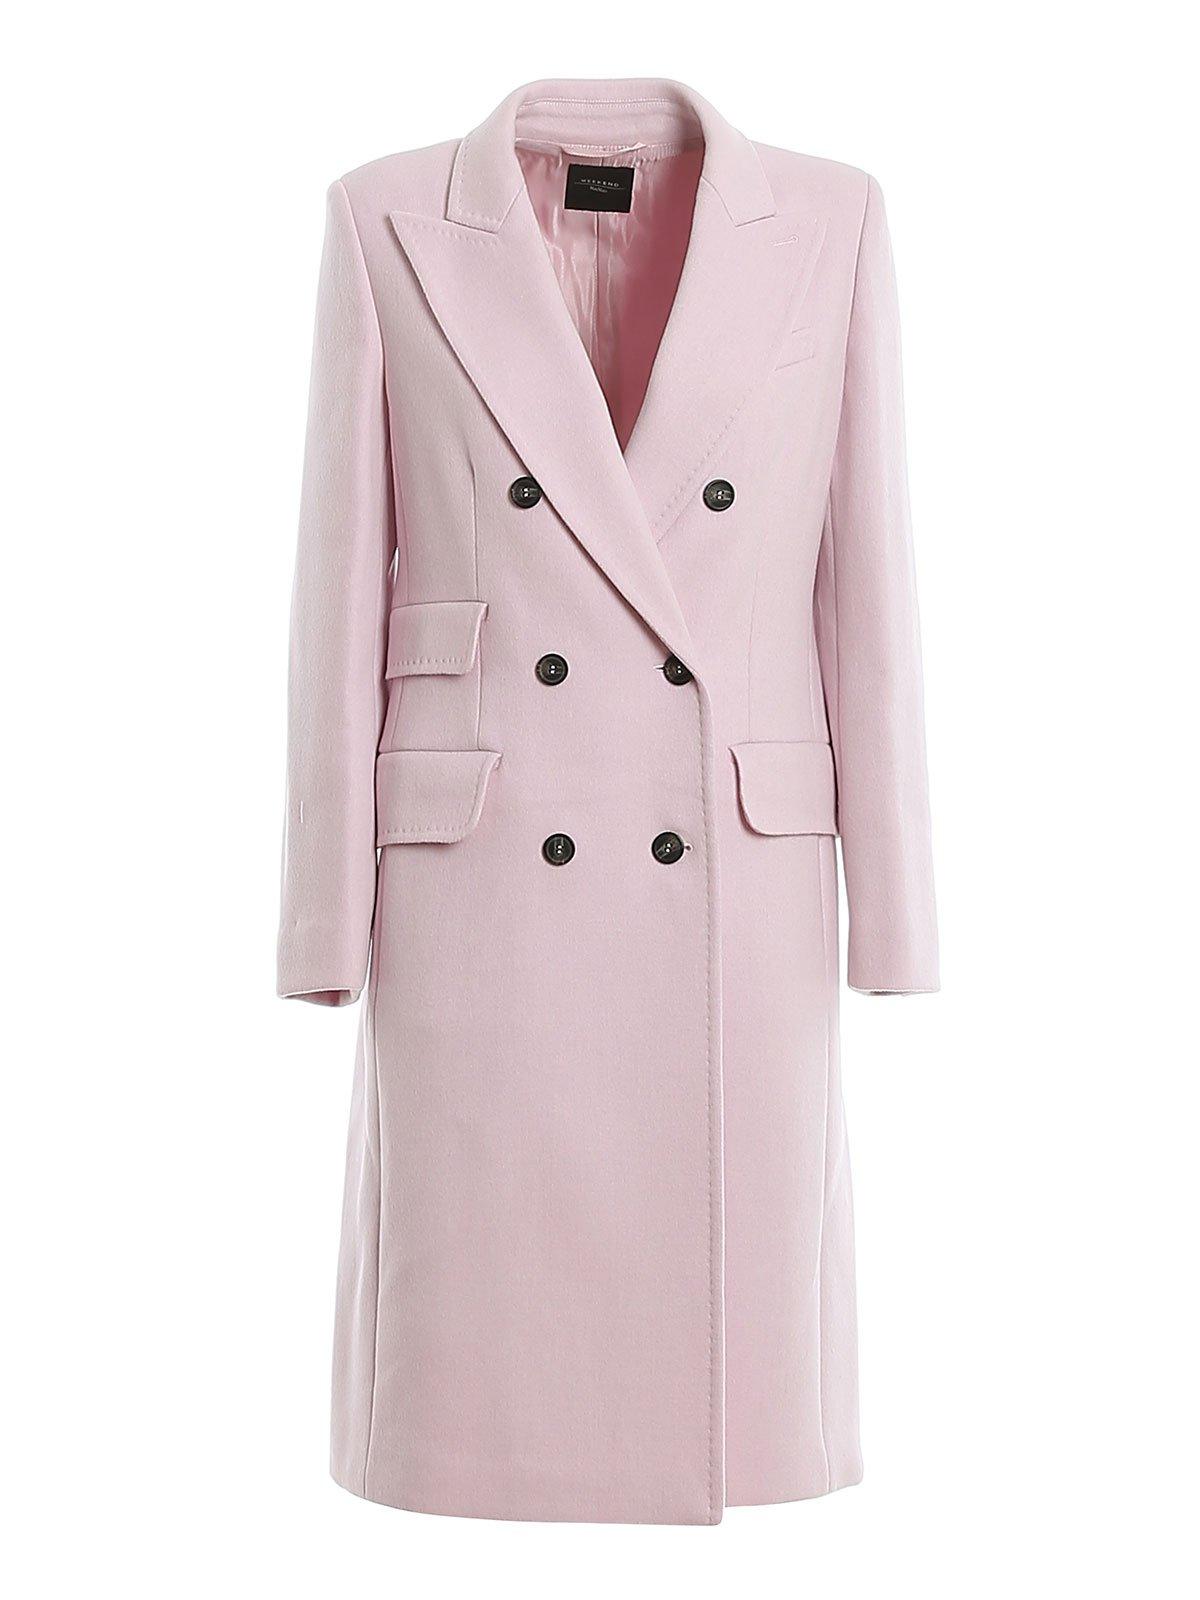 Weekend by Maxmara Wool Double Breasted Coat in Pink - Lyst